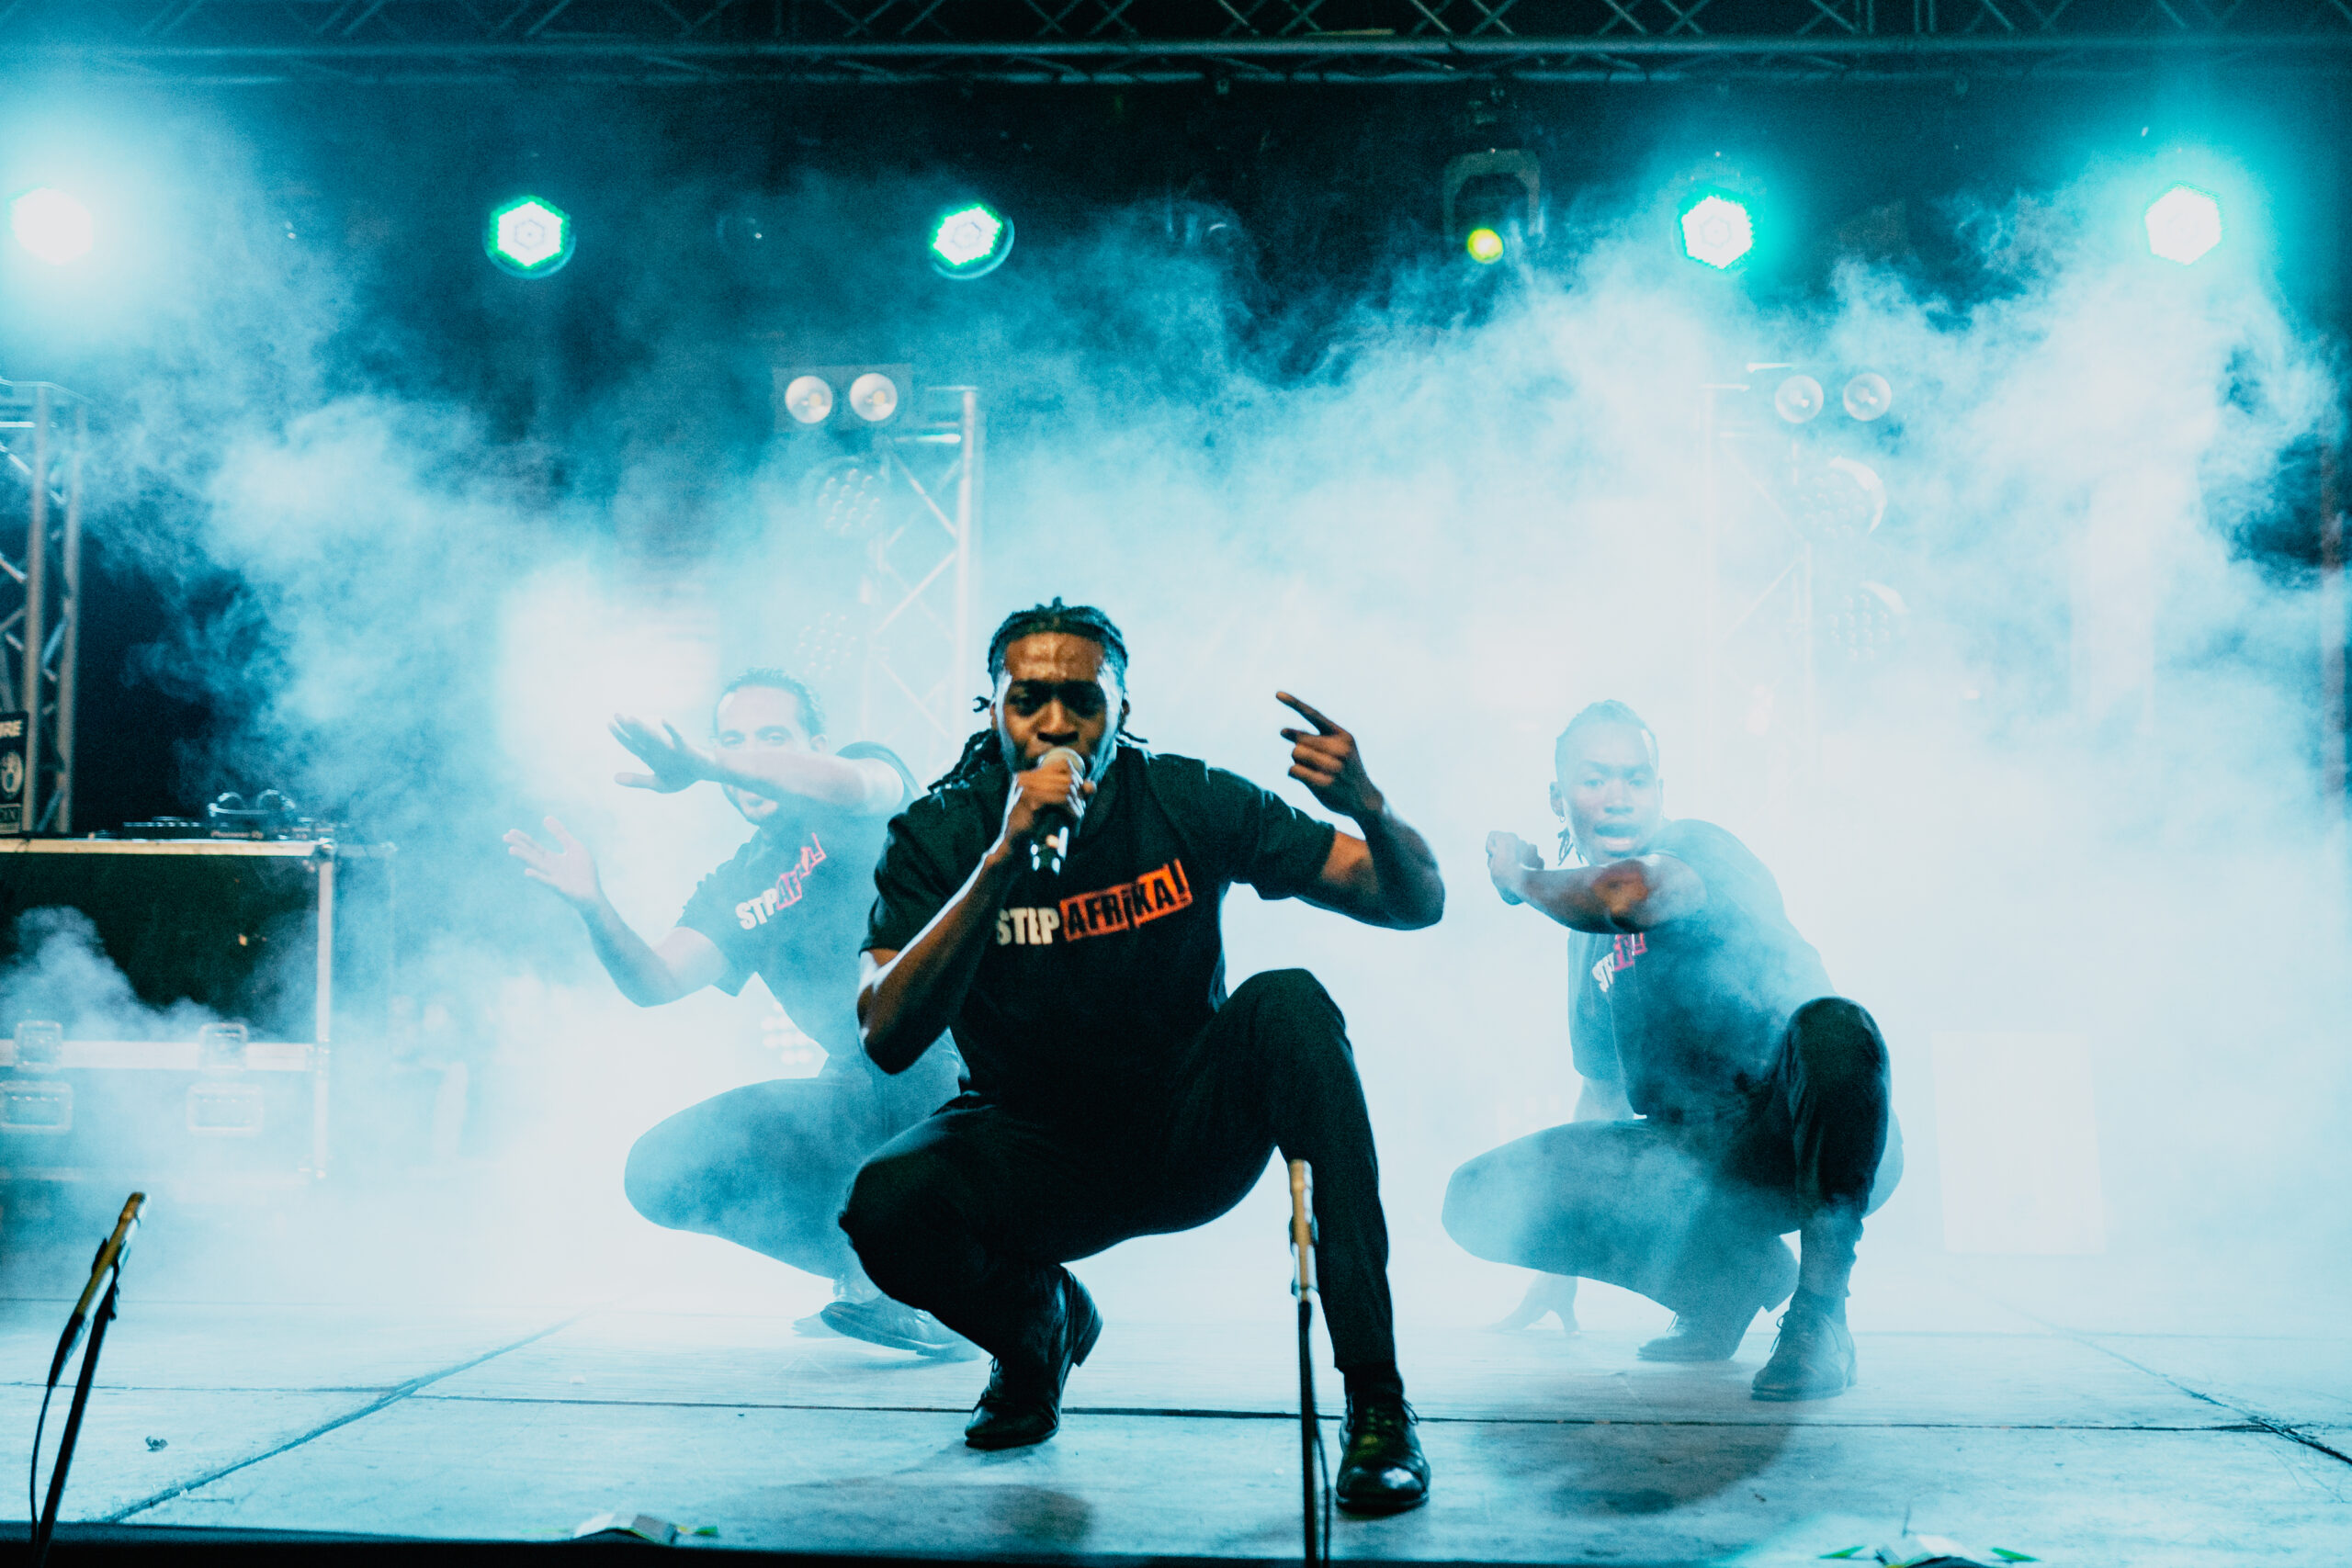 3 members of Step Afrika perfoming on stage surrounded by smoke and lighting effects